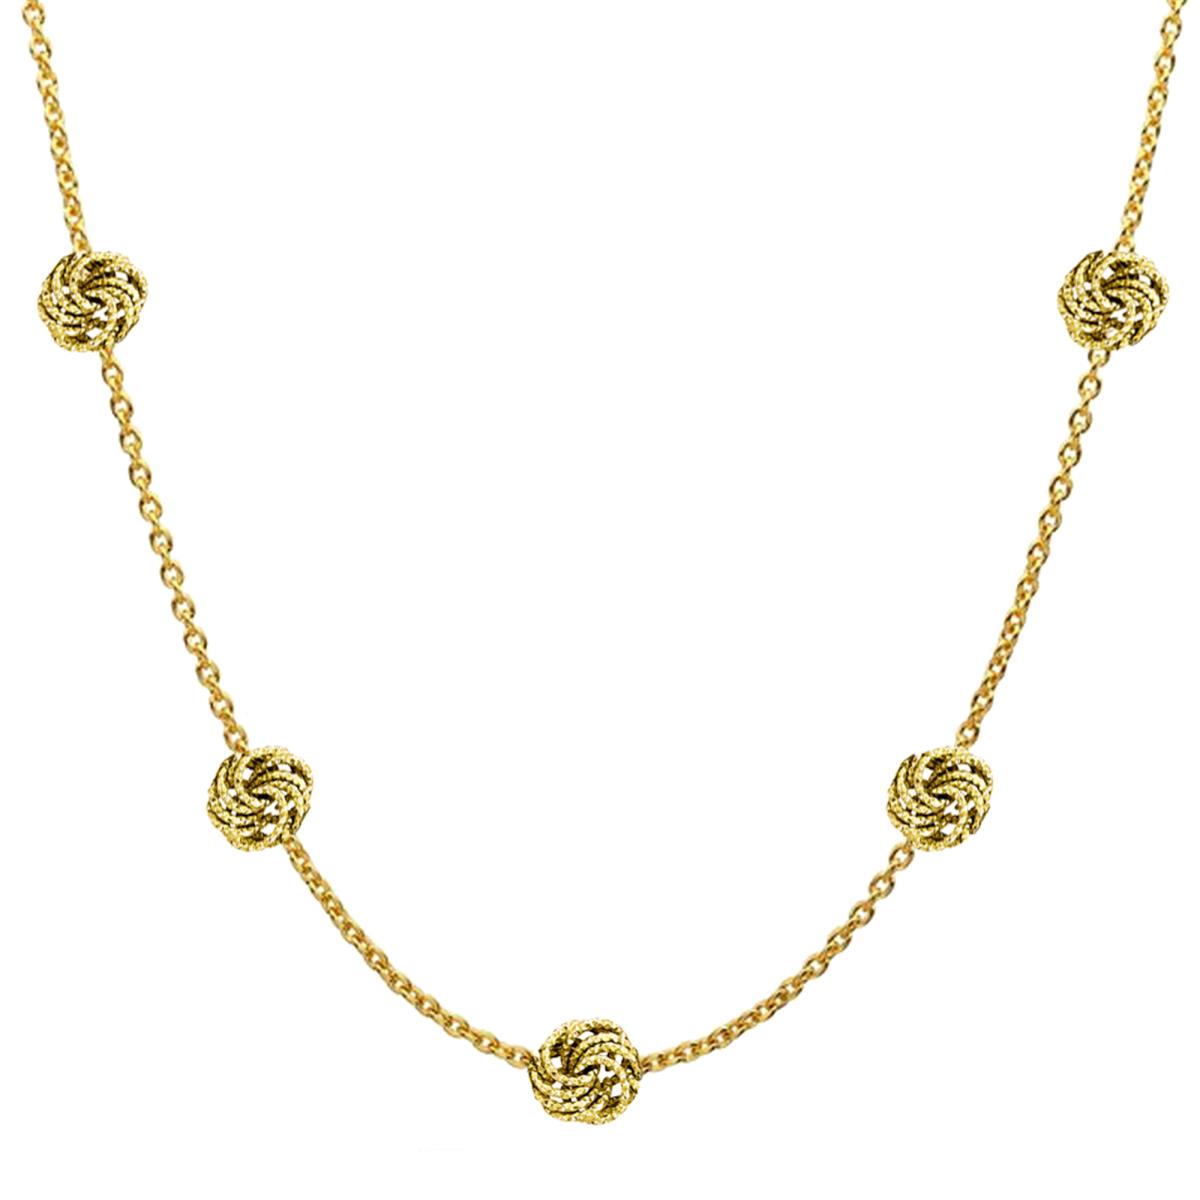 14K Yellow Gold DC Rosetta Station Necklace